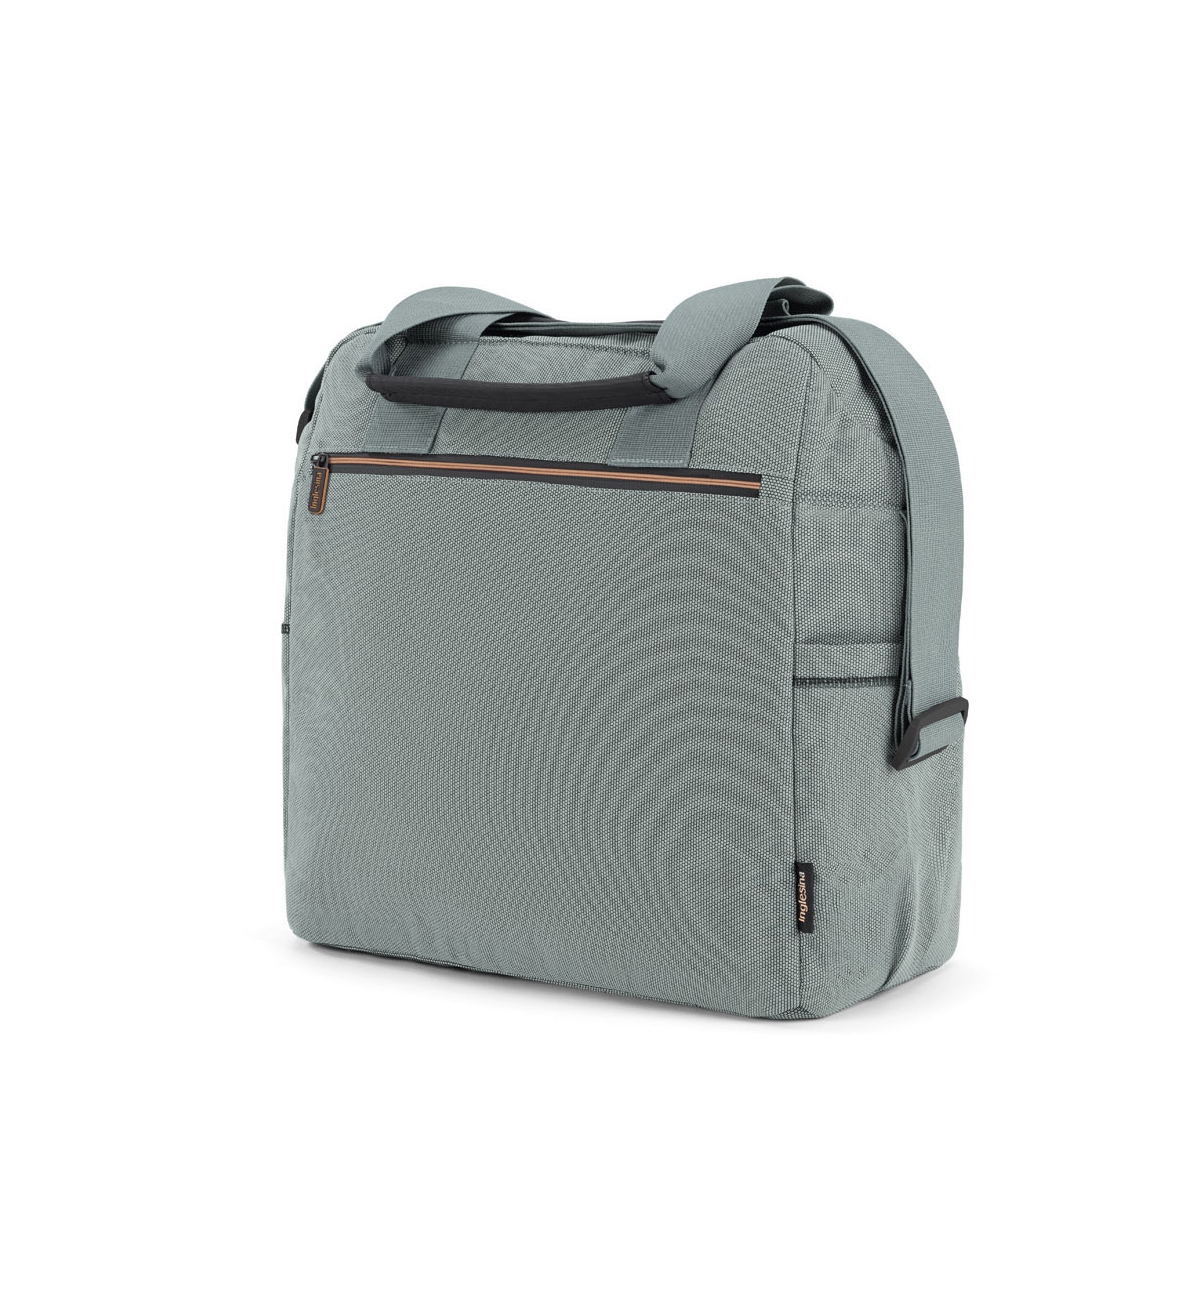 https://www.lachiocciolababy.it/images/contents/inglesina-borsa-cambio-day-bag-igloo-grey.jpg